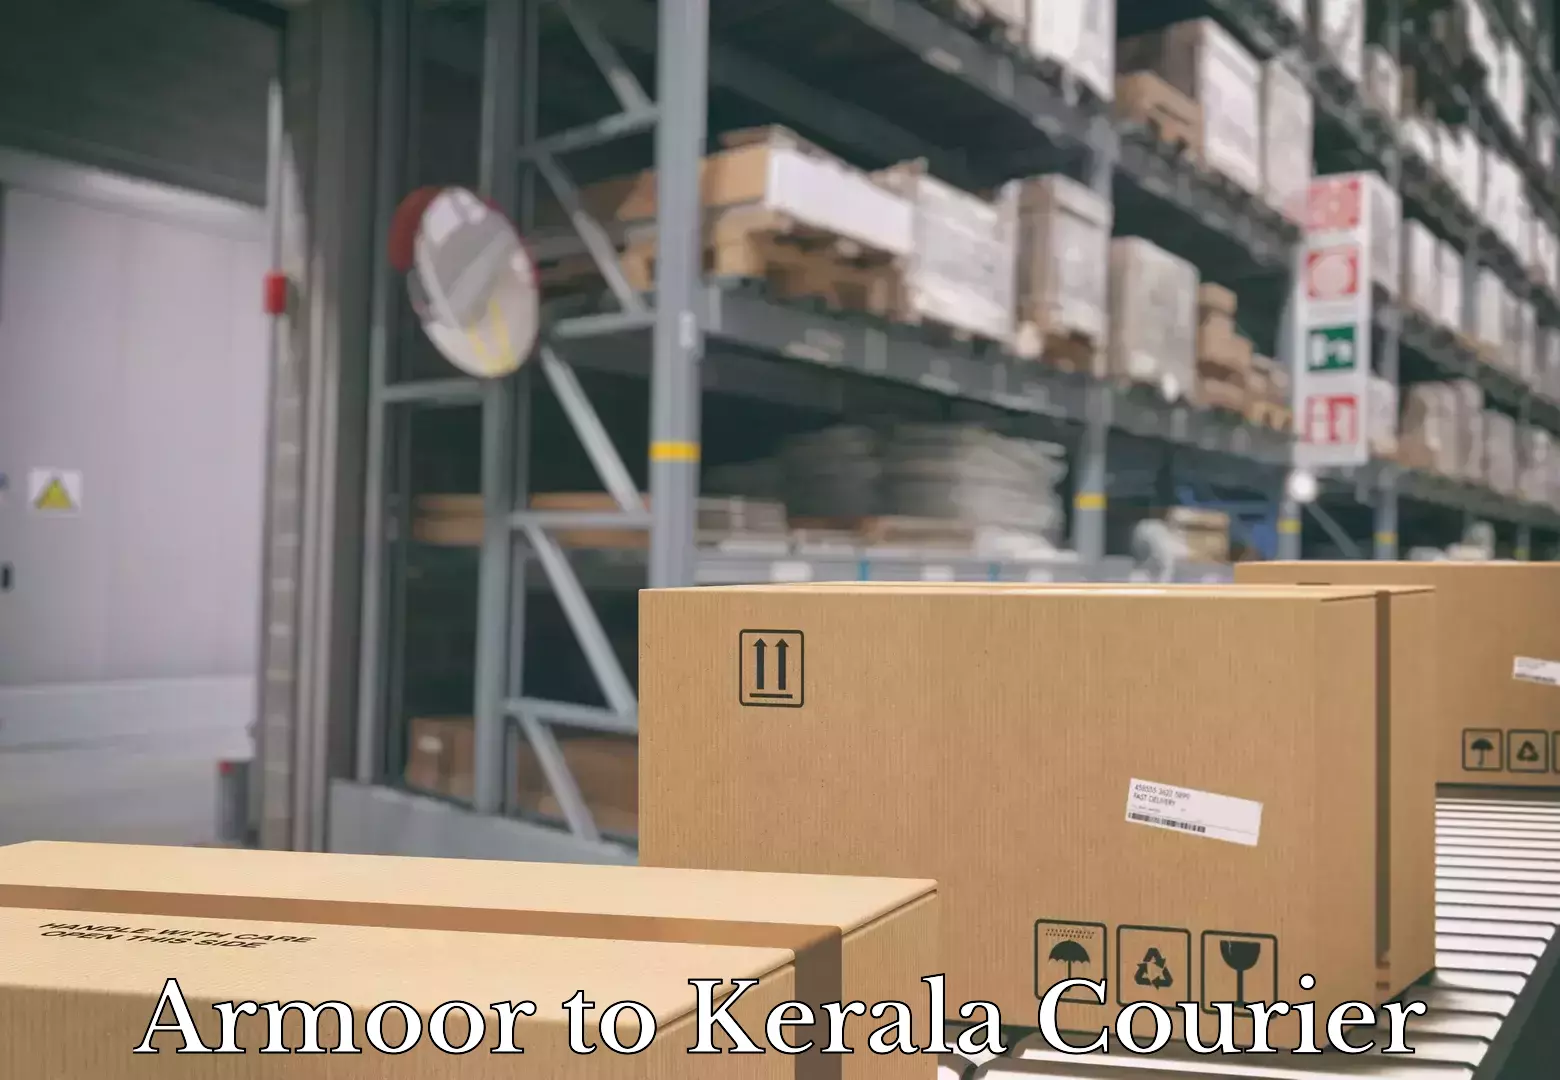 Full-service courier options Armoor to Kerala